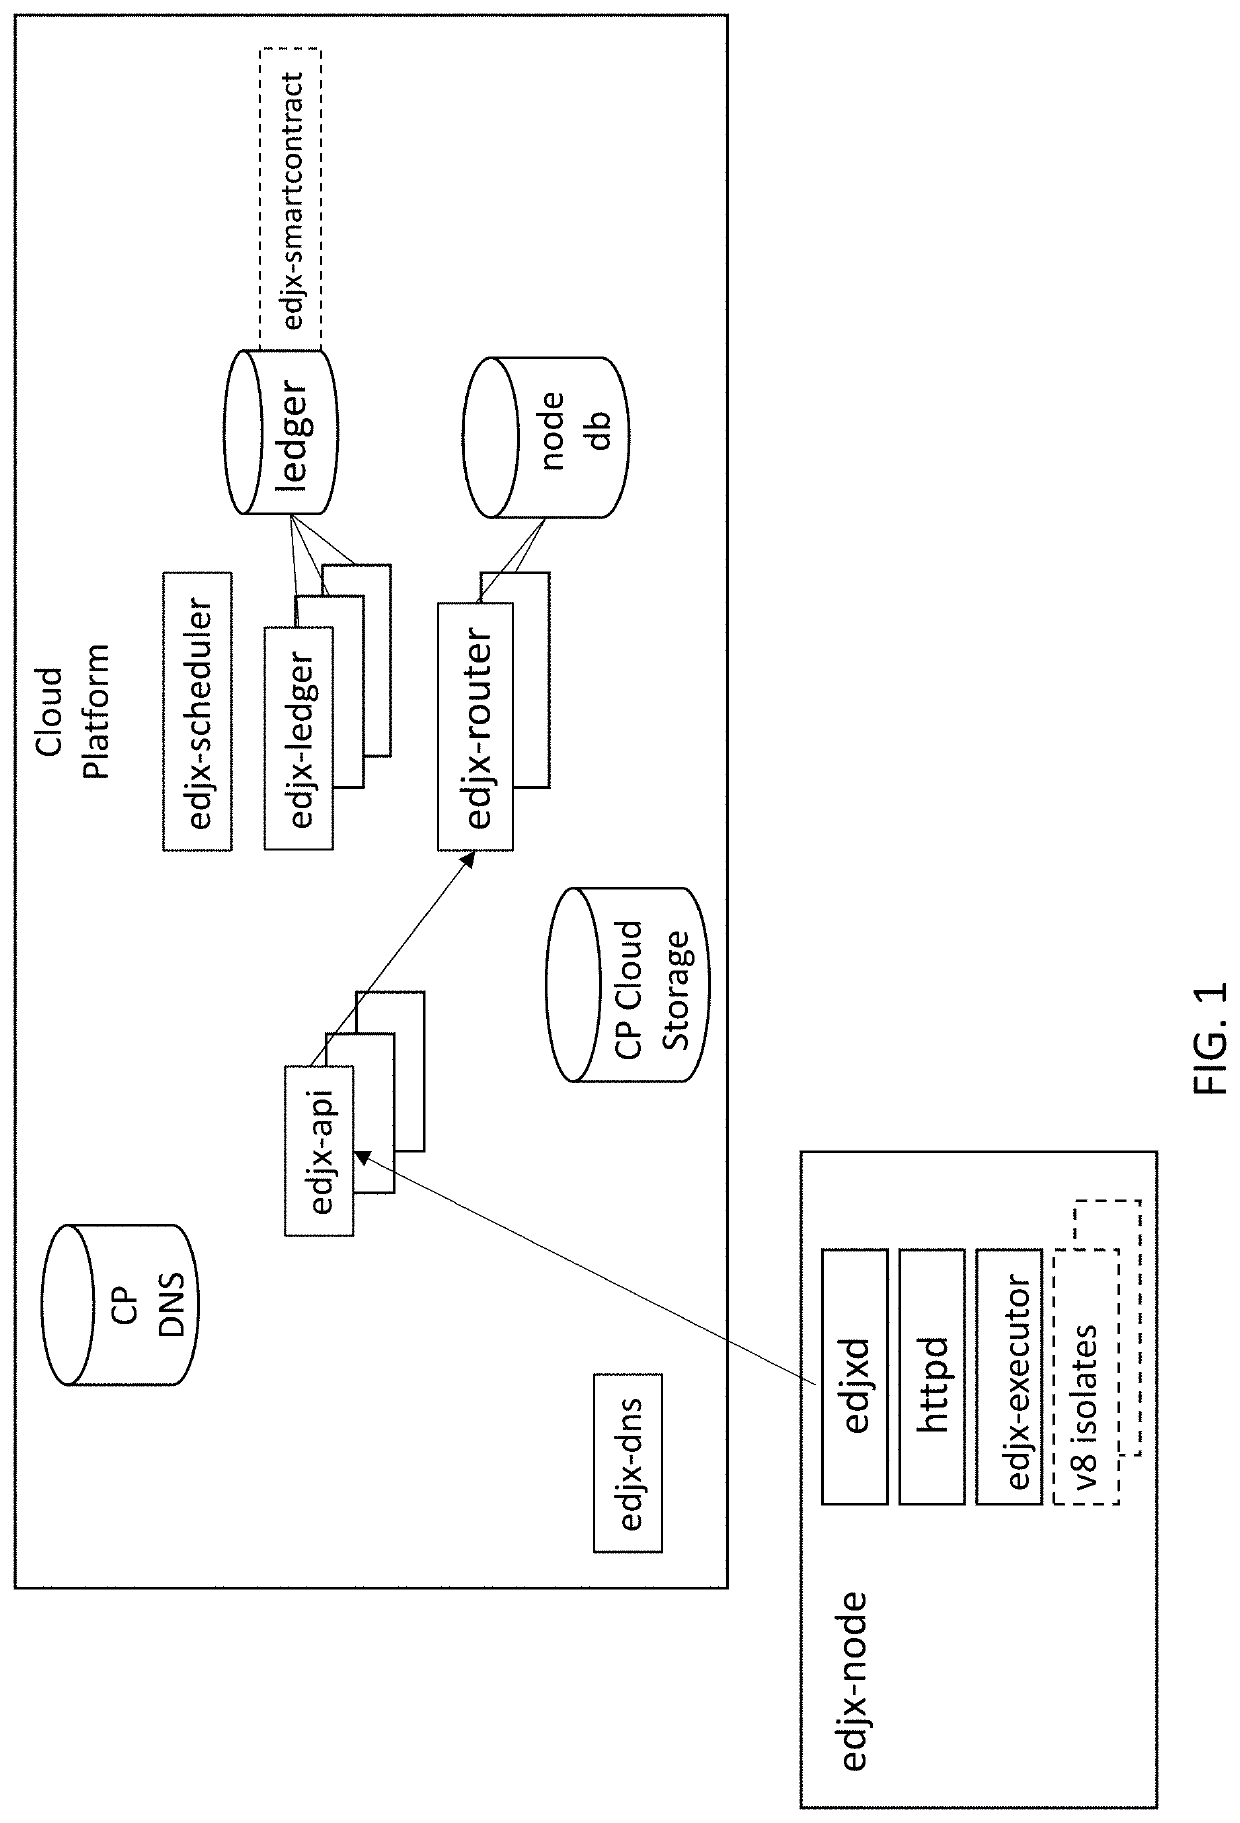 Systems and methods for locating server nodes in close proximity to edge devices using georouting